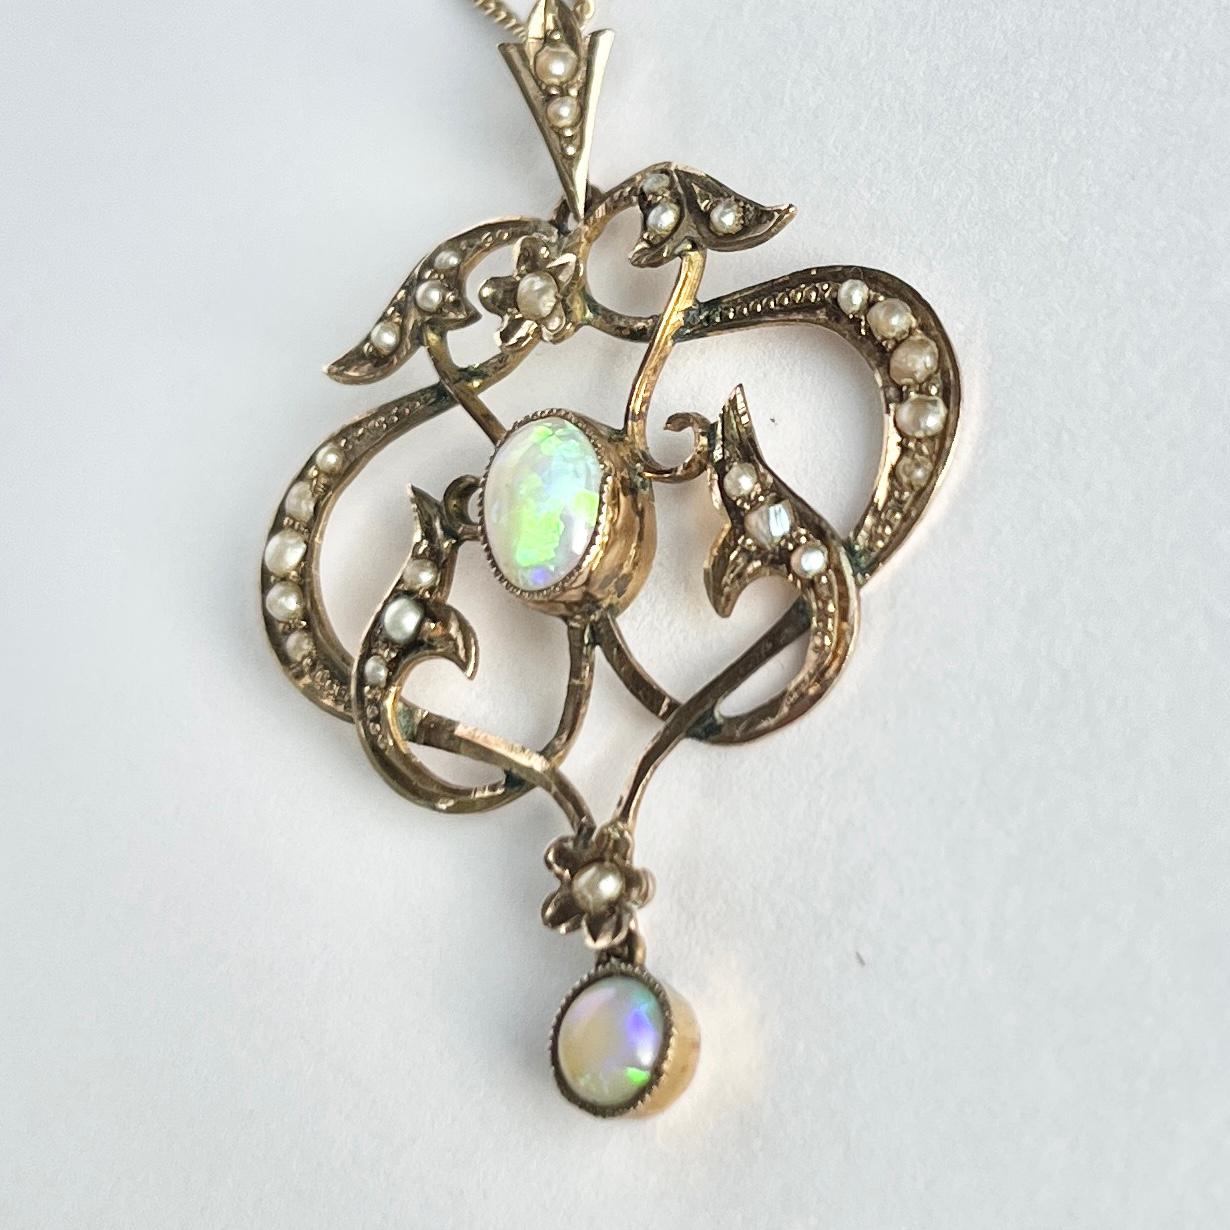 This sweet pendant holds seed pearls and colourful opals. The pendant and chain is modelled in 9carat gold.

Drop from loop: 30mm
Pendant Width: 35mm
Chain length: 46cm

Weight: 3.8g